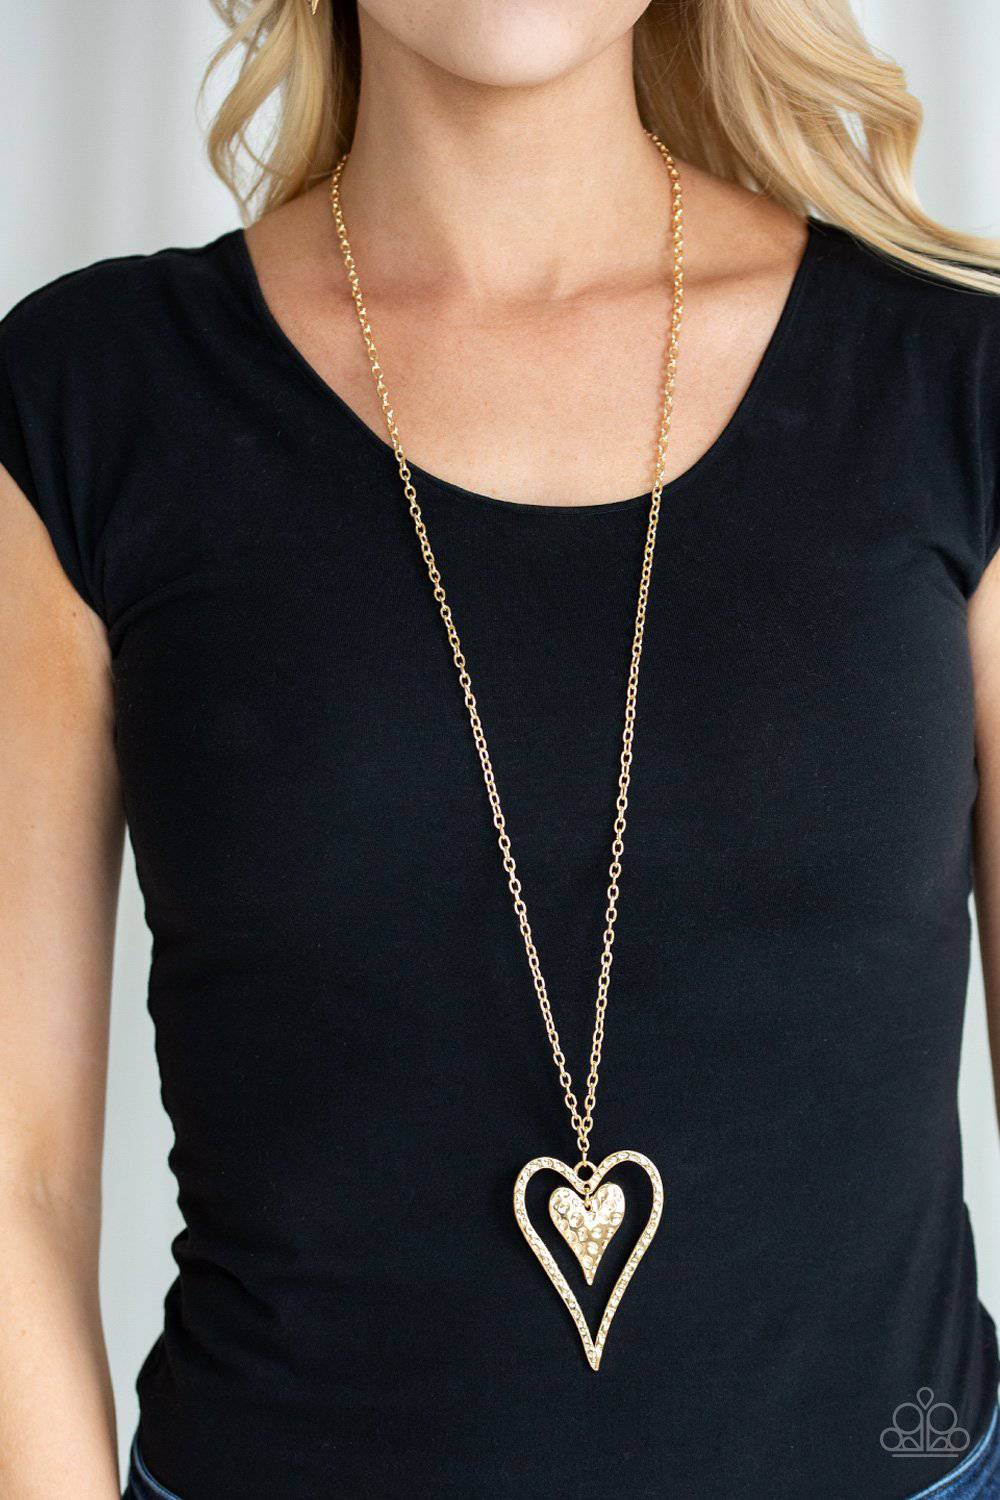 Hardened Hearts - Gold Heart Necklace - Paparazzi Accessories - GlaMarous Titi Jewels